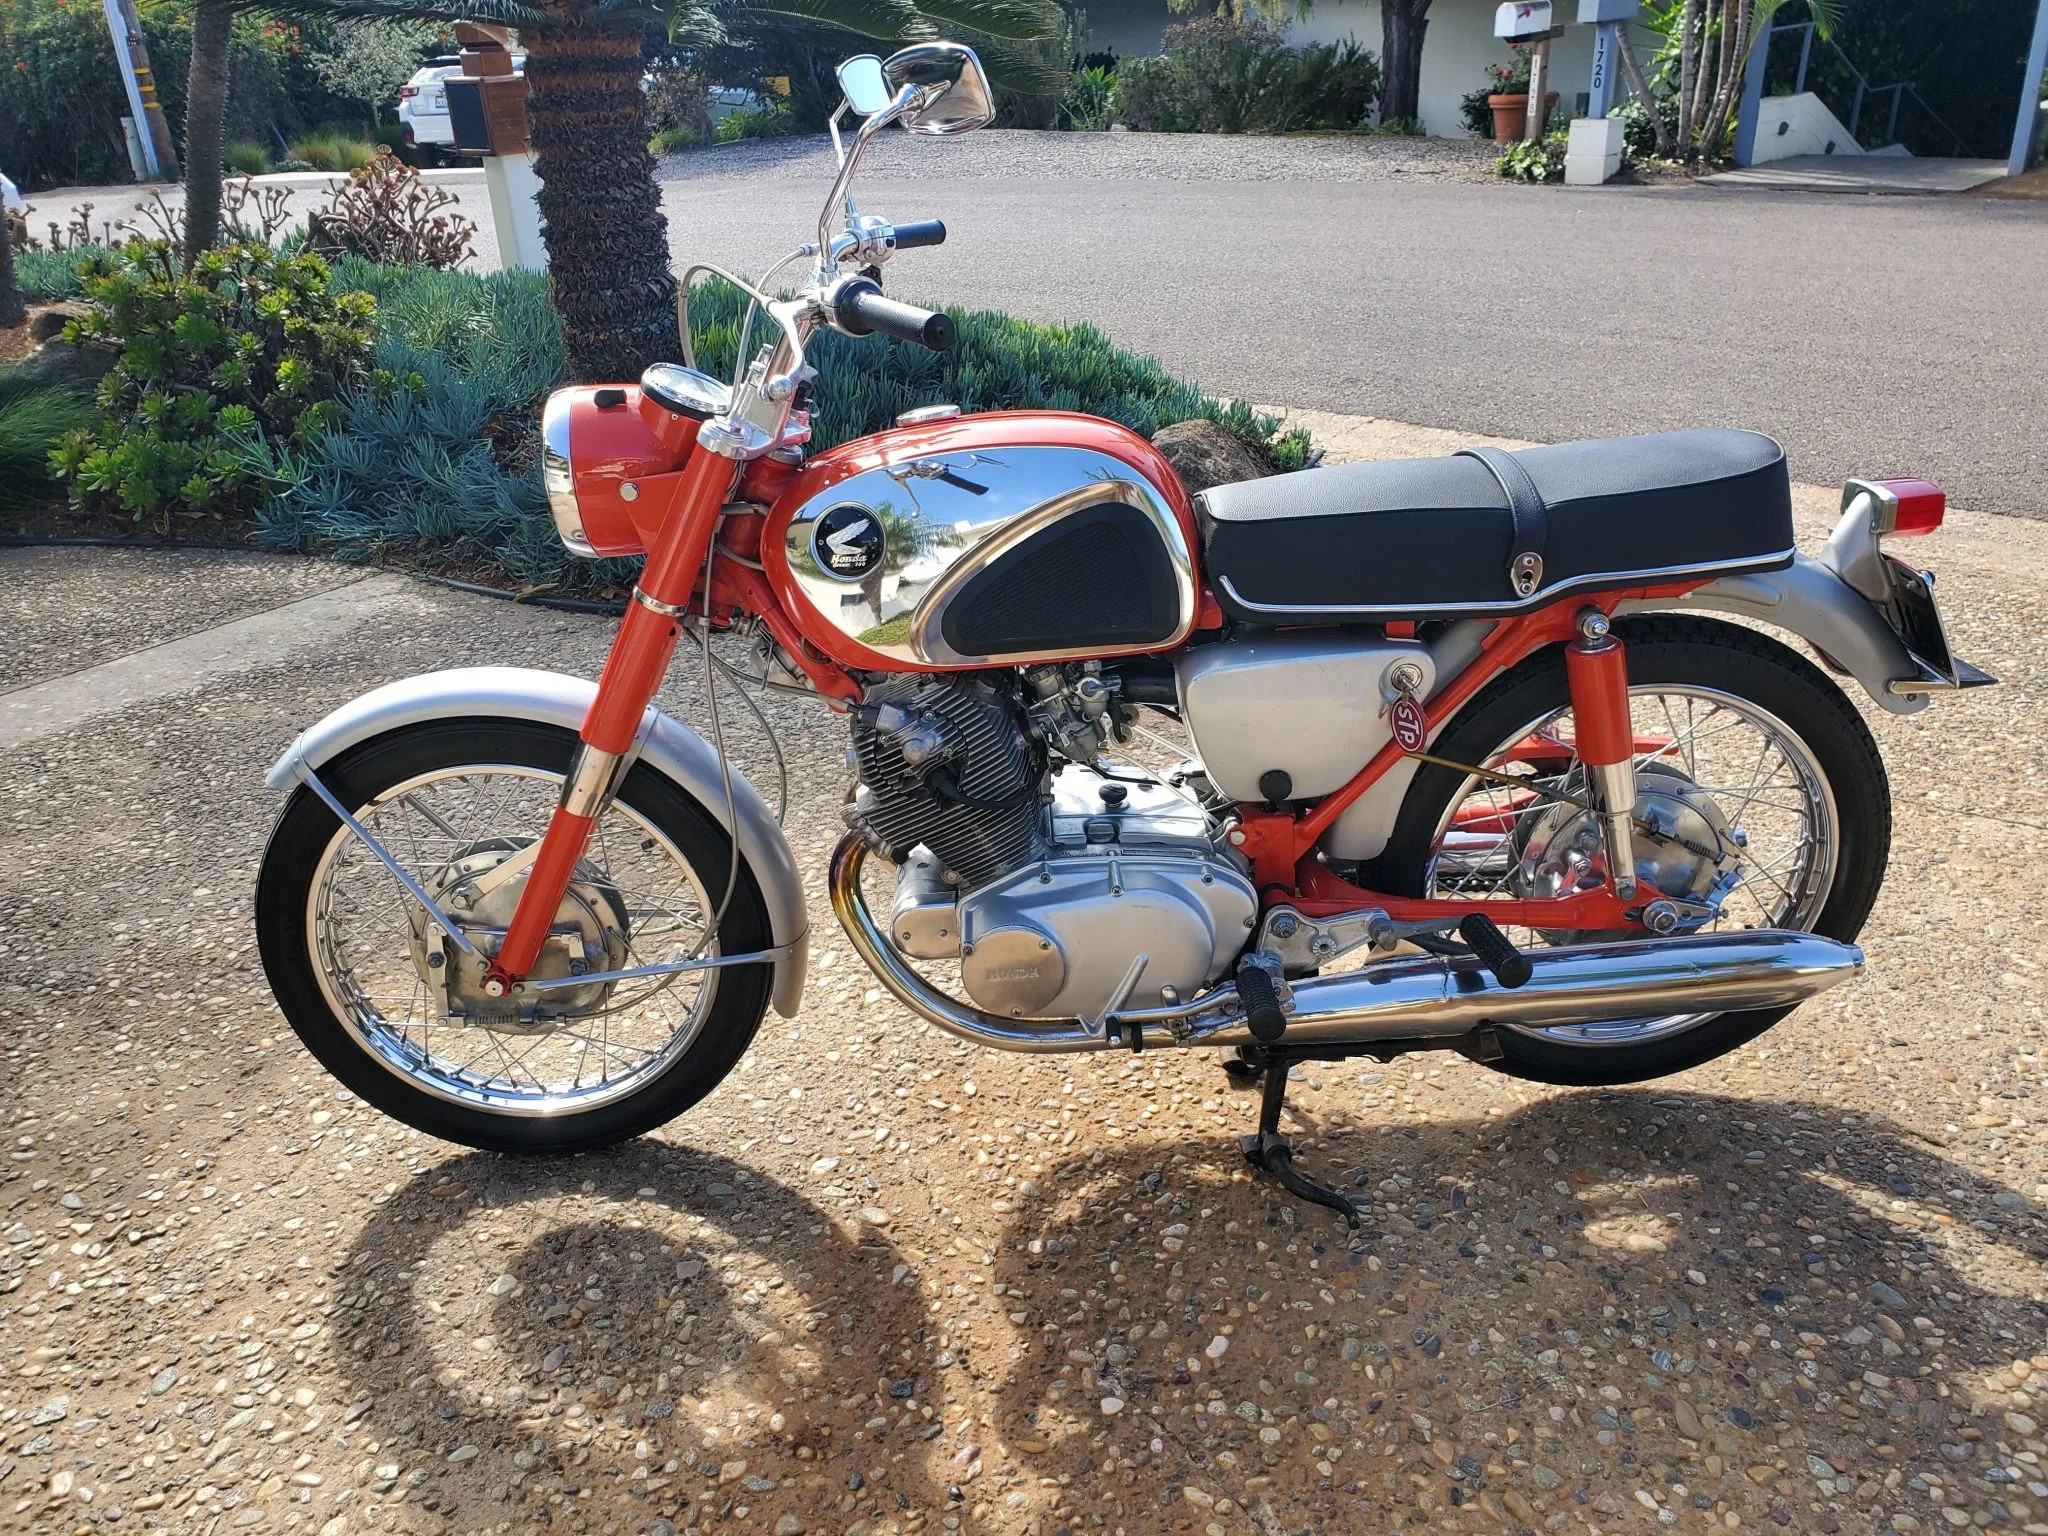 Collectible 1979 Honda CBX in Near-Perfect Shape Will Set You Back Nearly  $30K - autoevolution